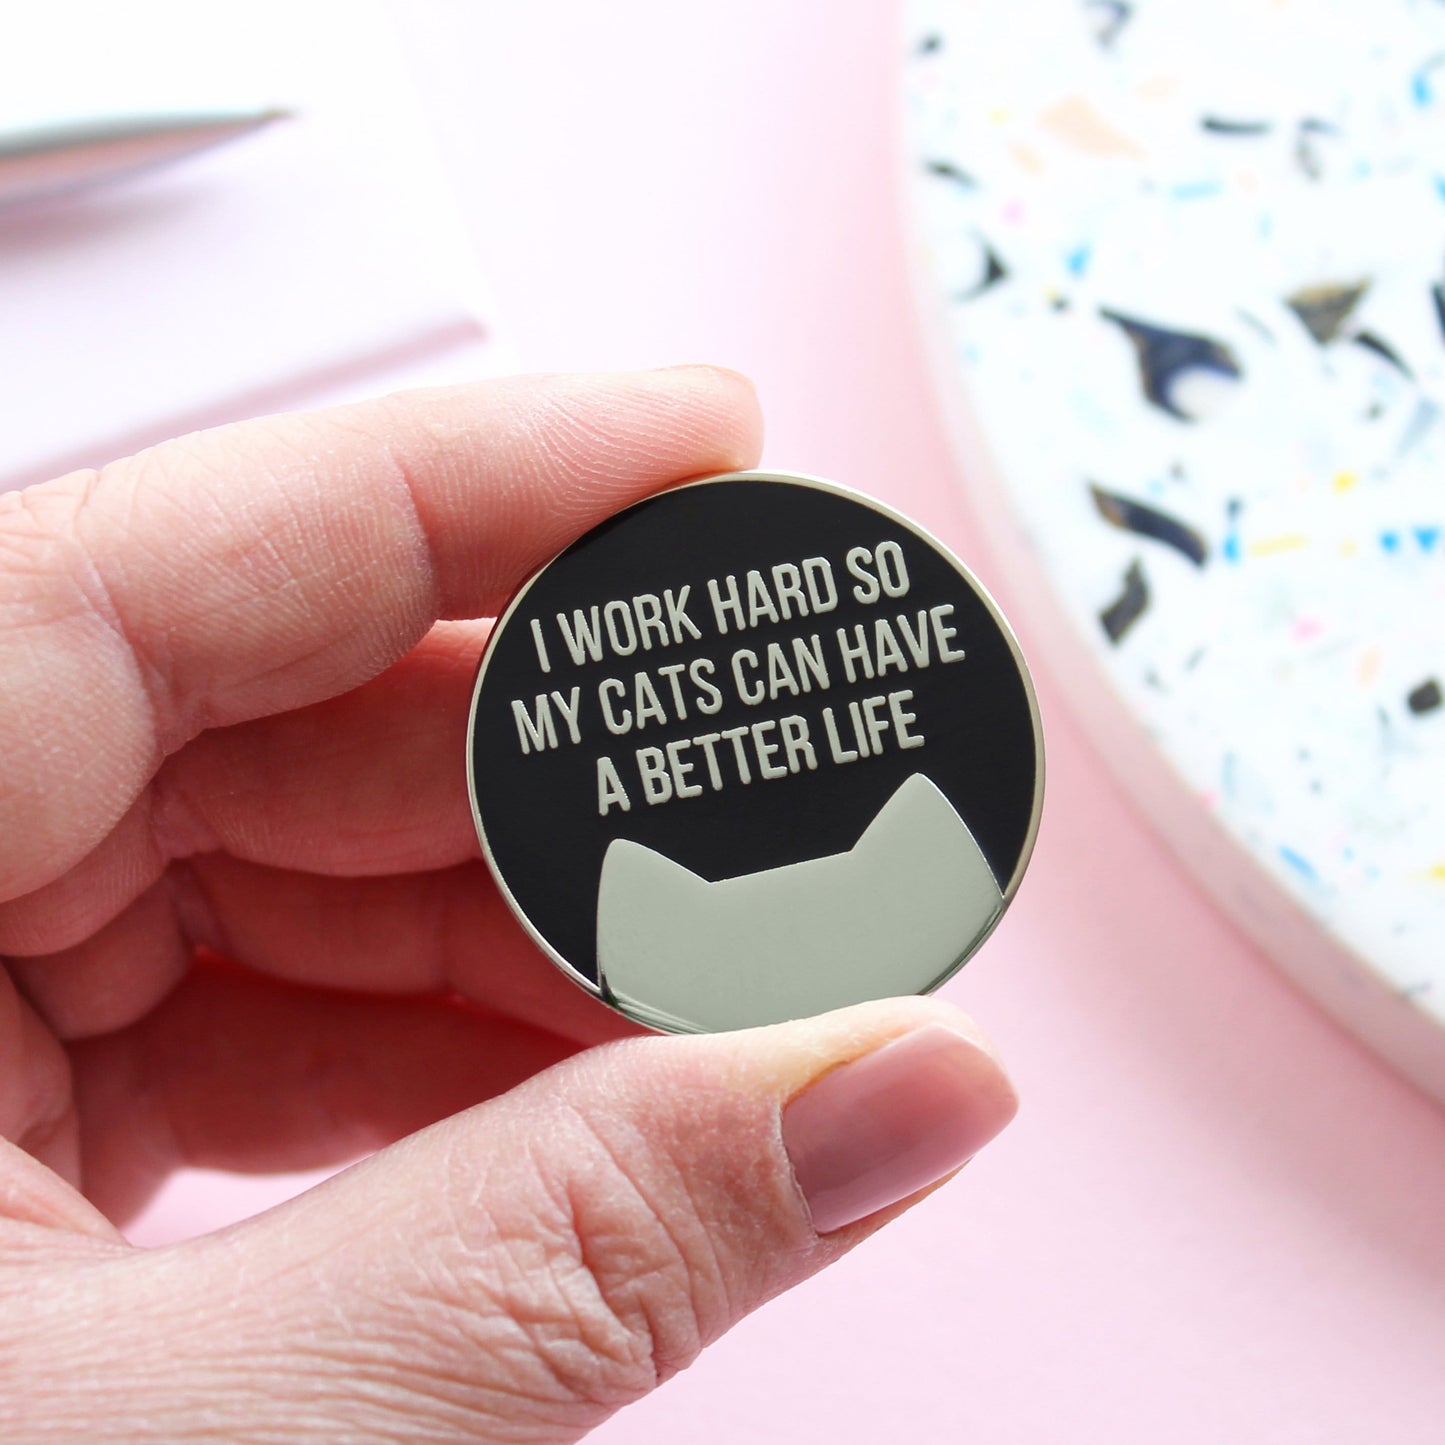 I work hard so my cats can have a better life enamel pin badge from Purple Tree Designs